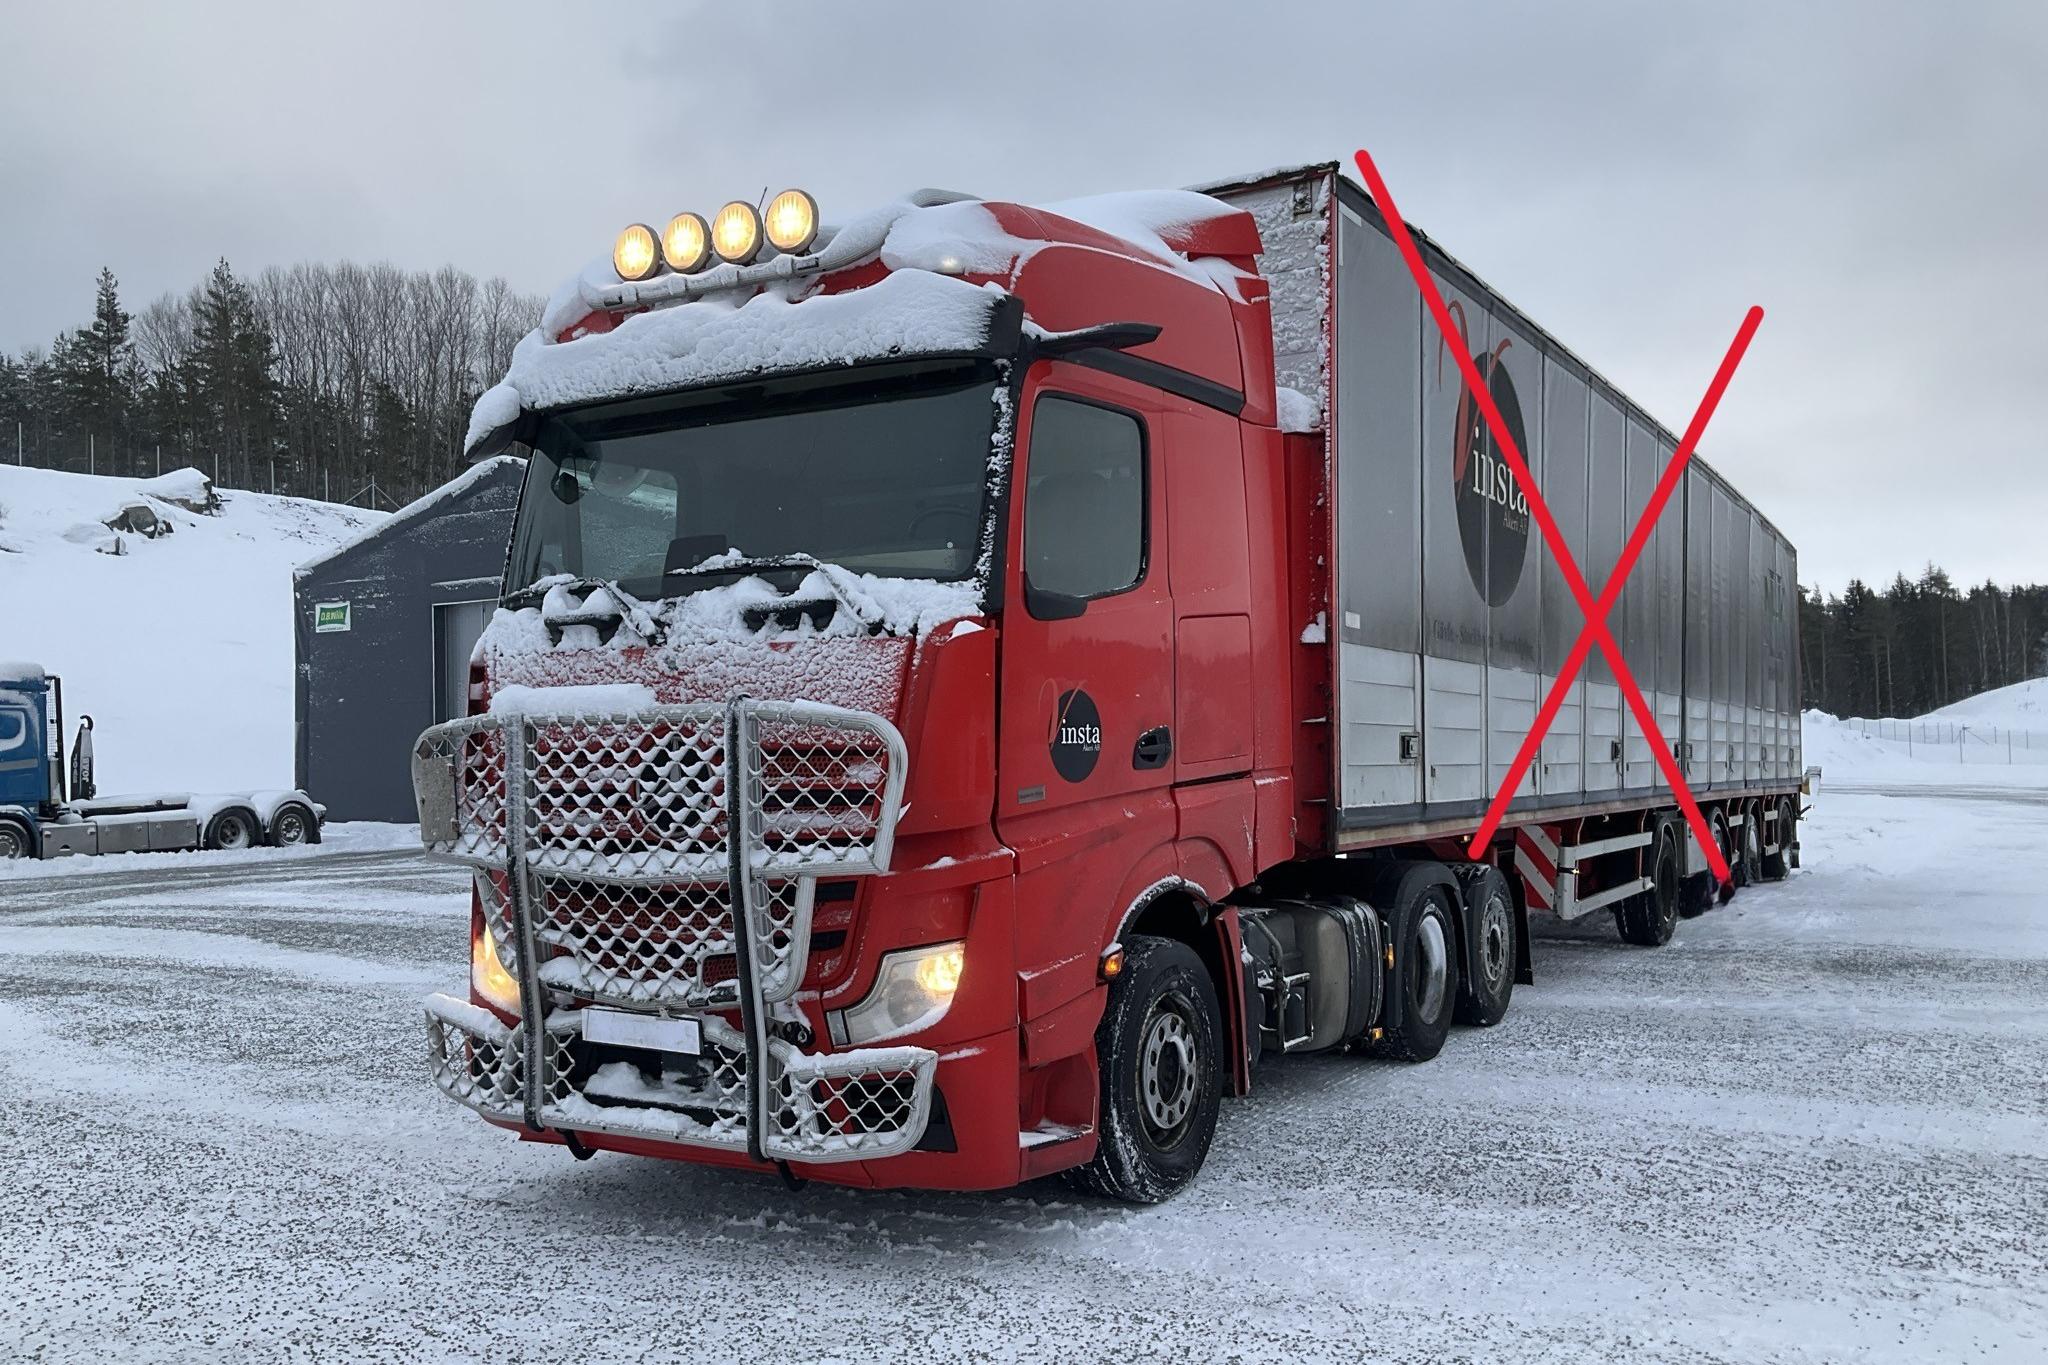 MERCEDES Actros - 524 991 km - Automatic - red - 2019